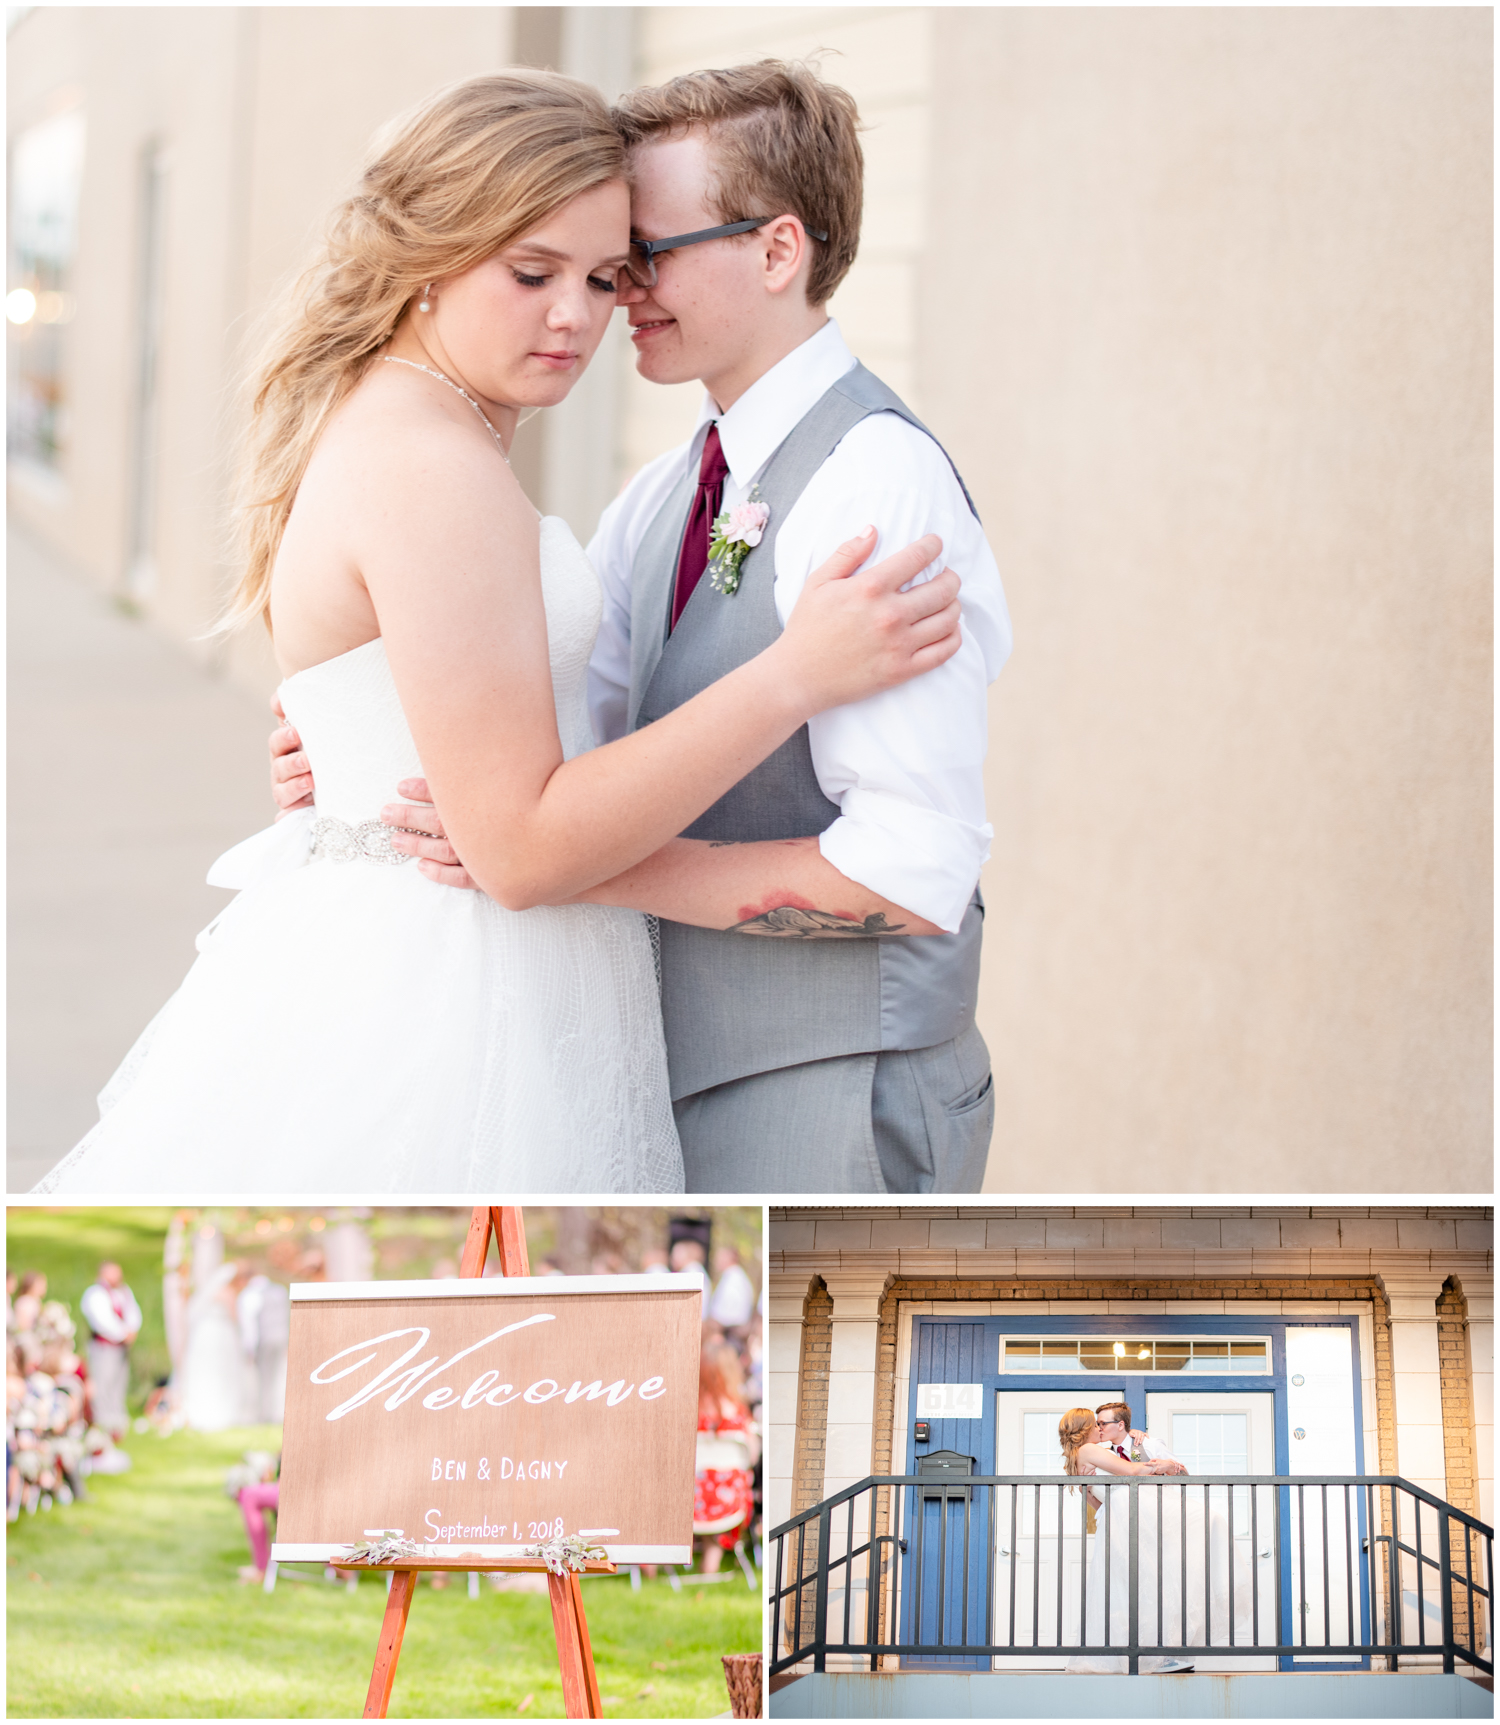 Summer Wedding in Greeley at Glenmere Park and The Armory | Britni Girard Photography - Wedding Photographer